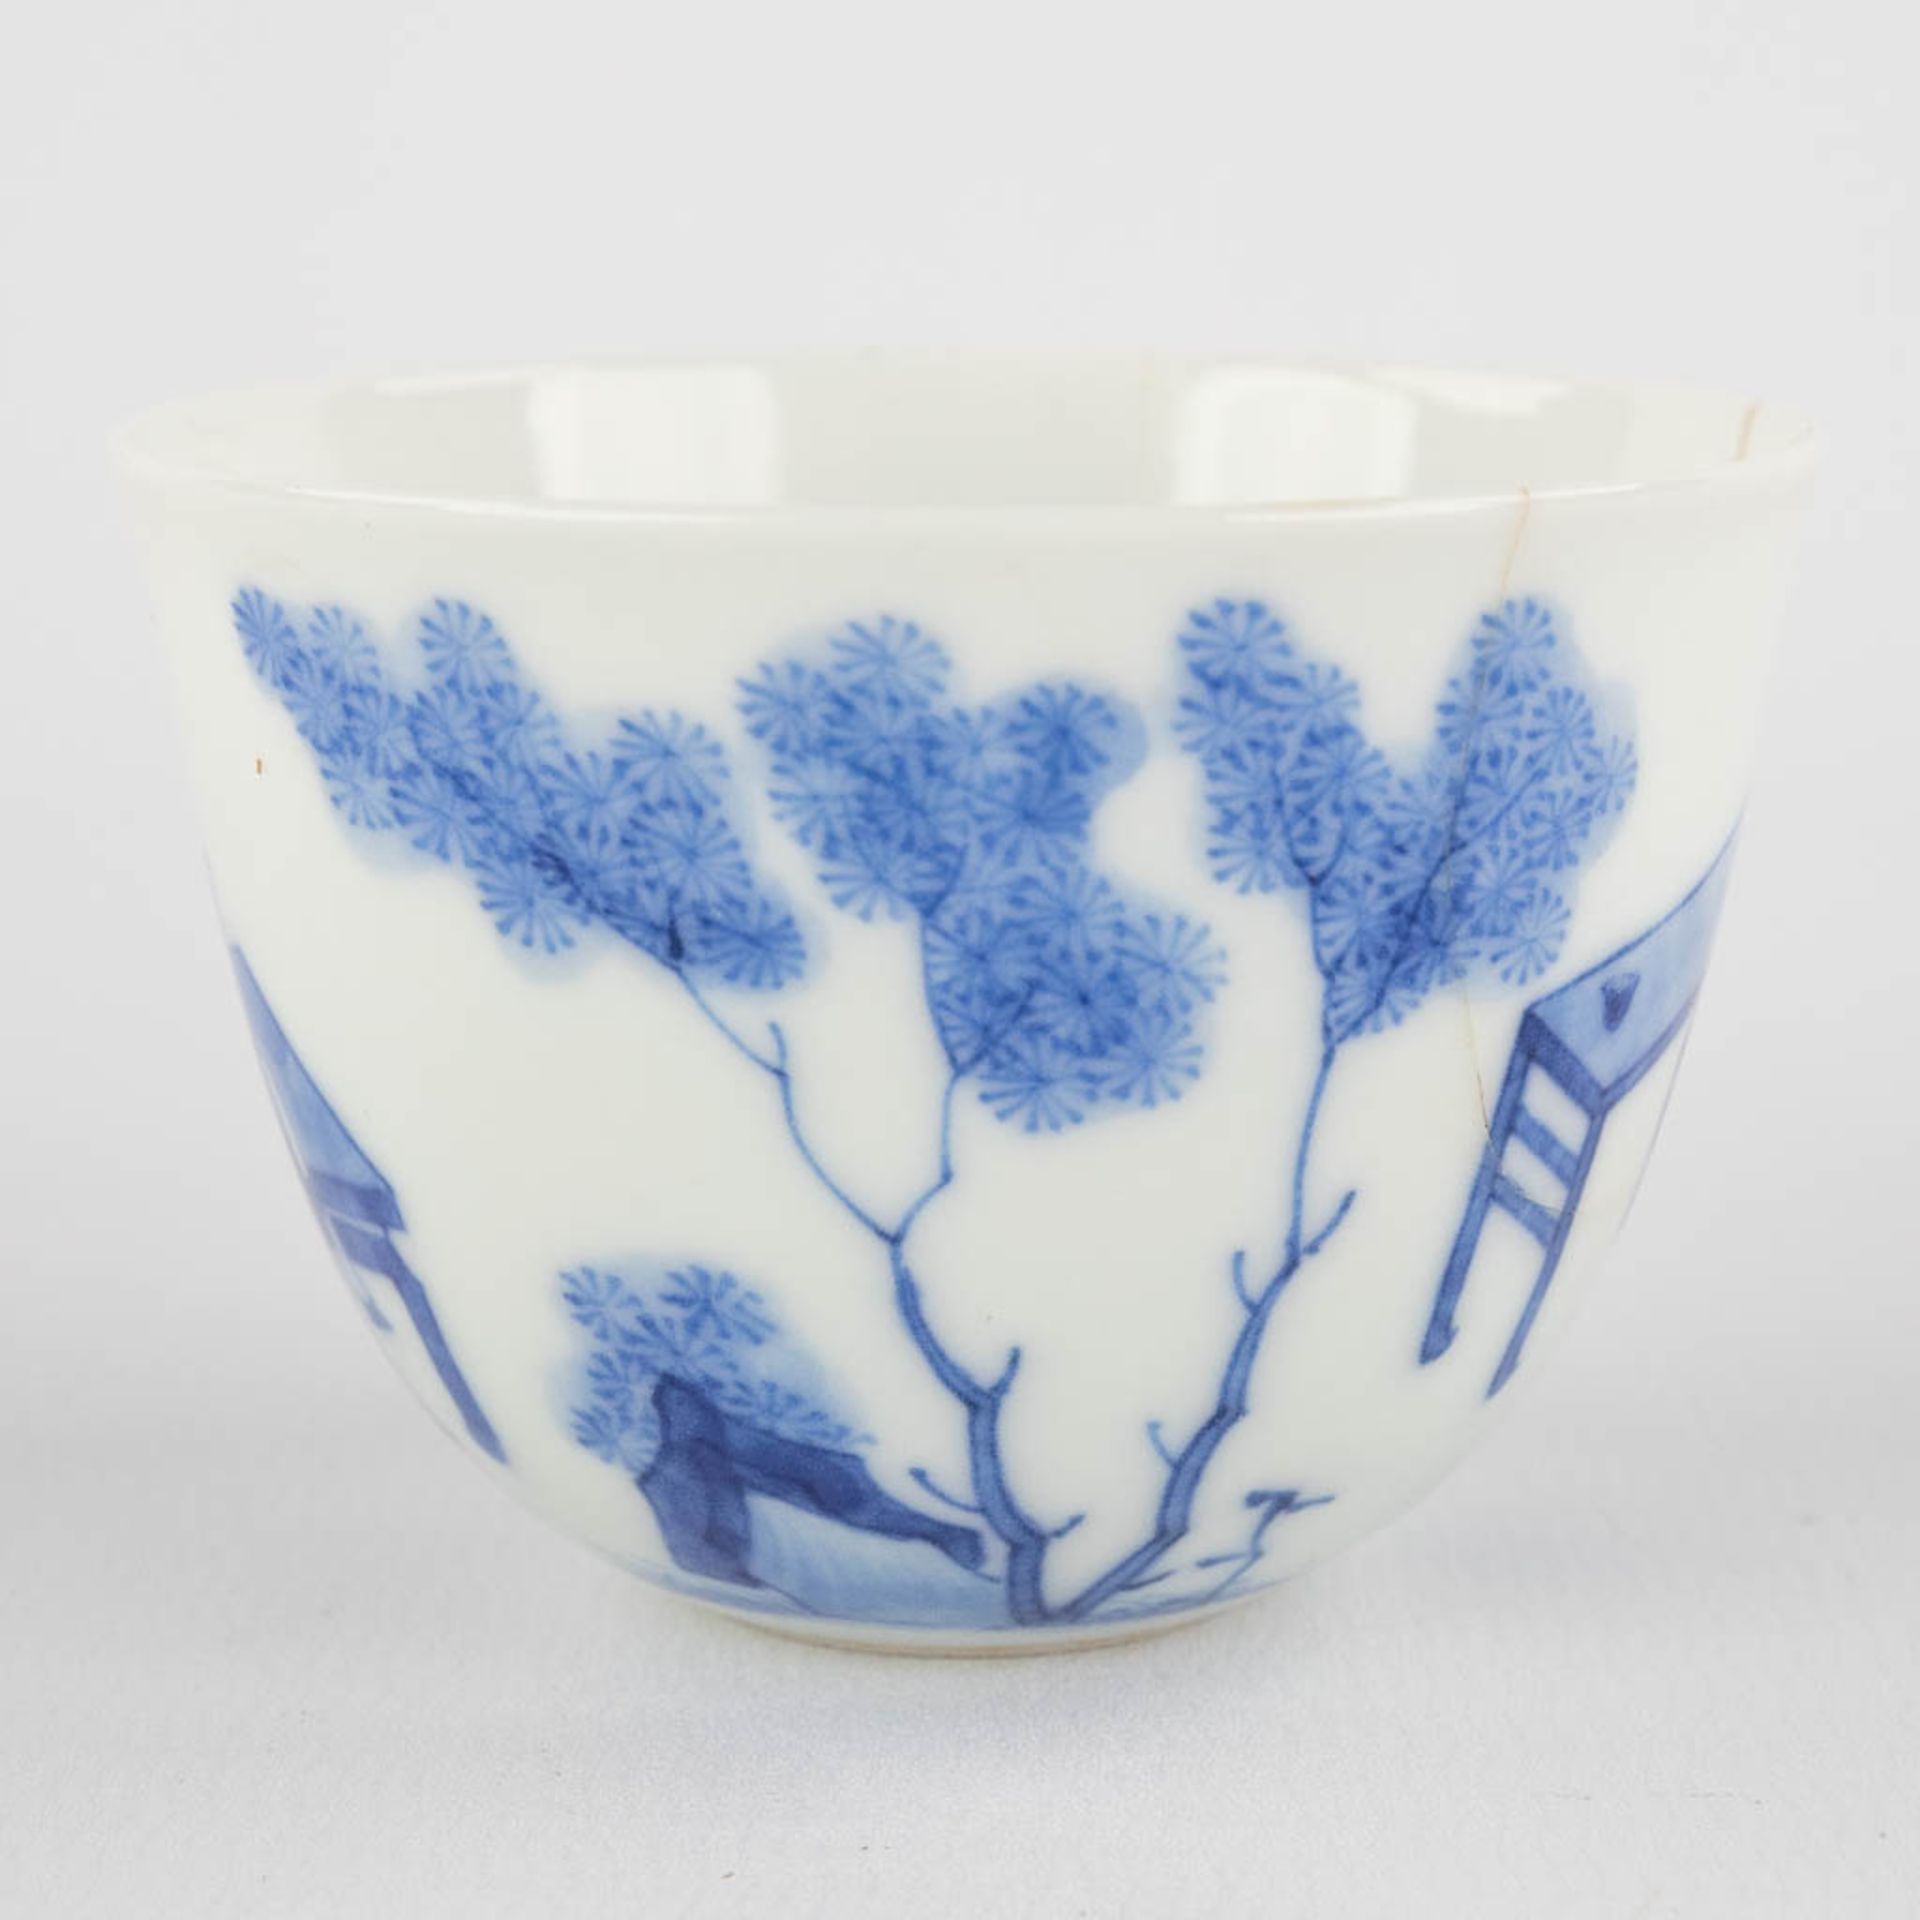 A small Chinese teacup with blue-white erotic scène, Chenghua mark, 19th/20th C. (H:4,5 x D:6,2 cm) - Image 6 of 11